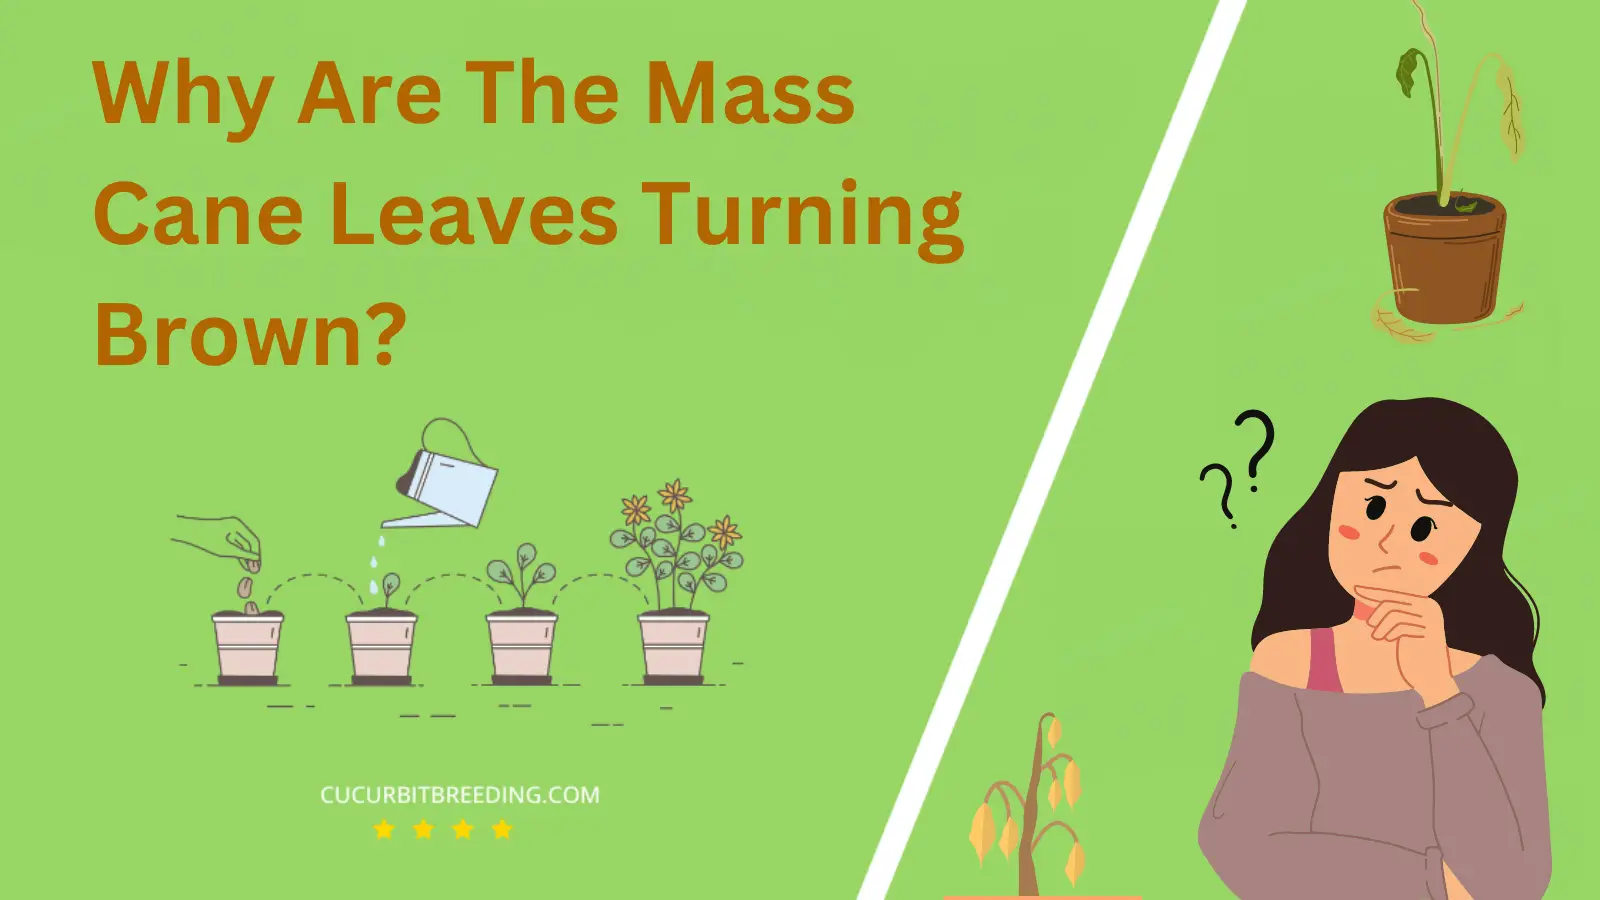 Why Are The Mass Cane Leaves Turning Brown